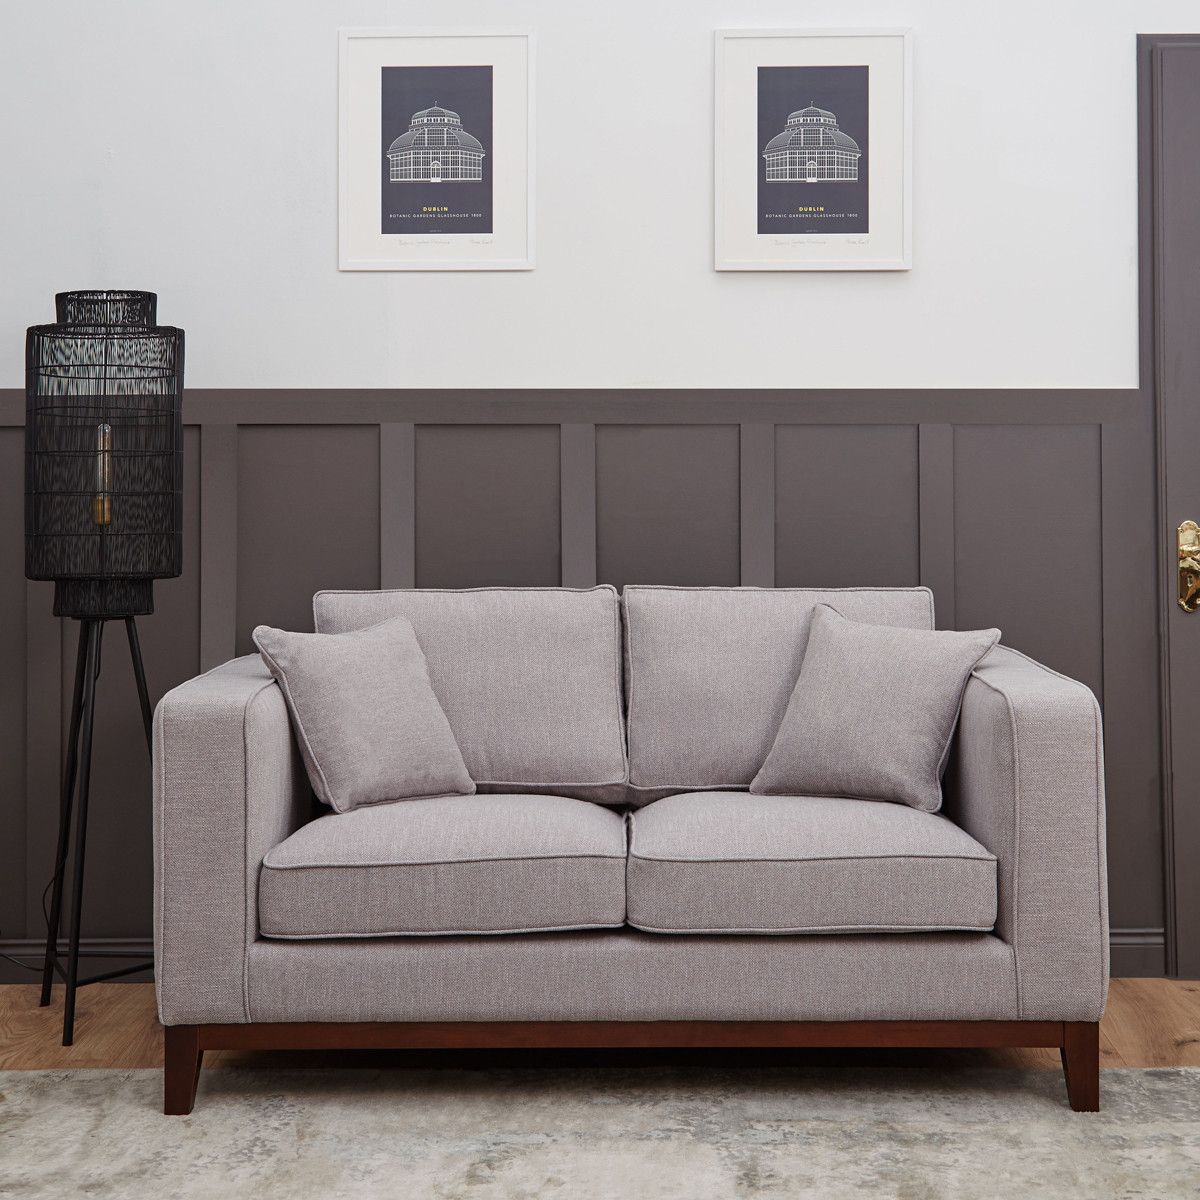 Nolan Traditional Sofa Collection – Grey | Meadows And Byrne With Traditional 3 Seater Sofas (View 14 of 15)